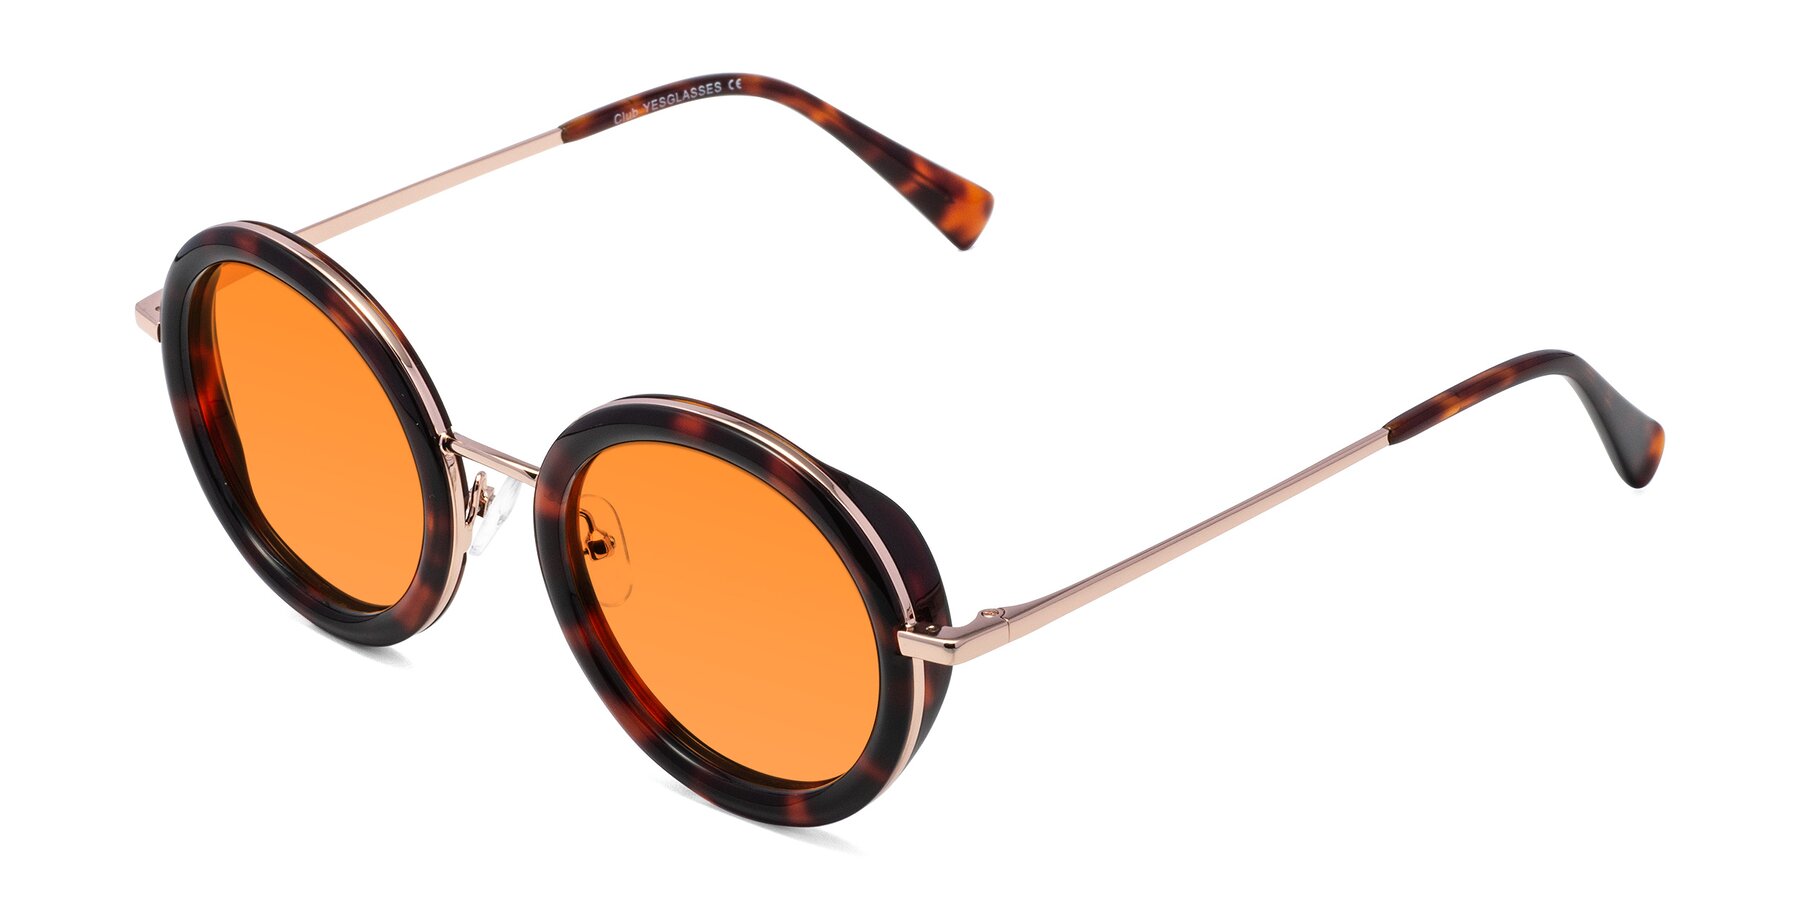 Angle of Club in Tortoise-Rose Gold with Orange Tinted Lenses